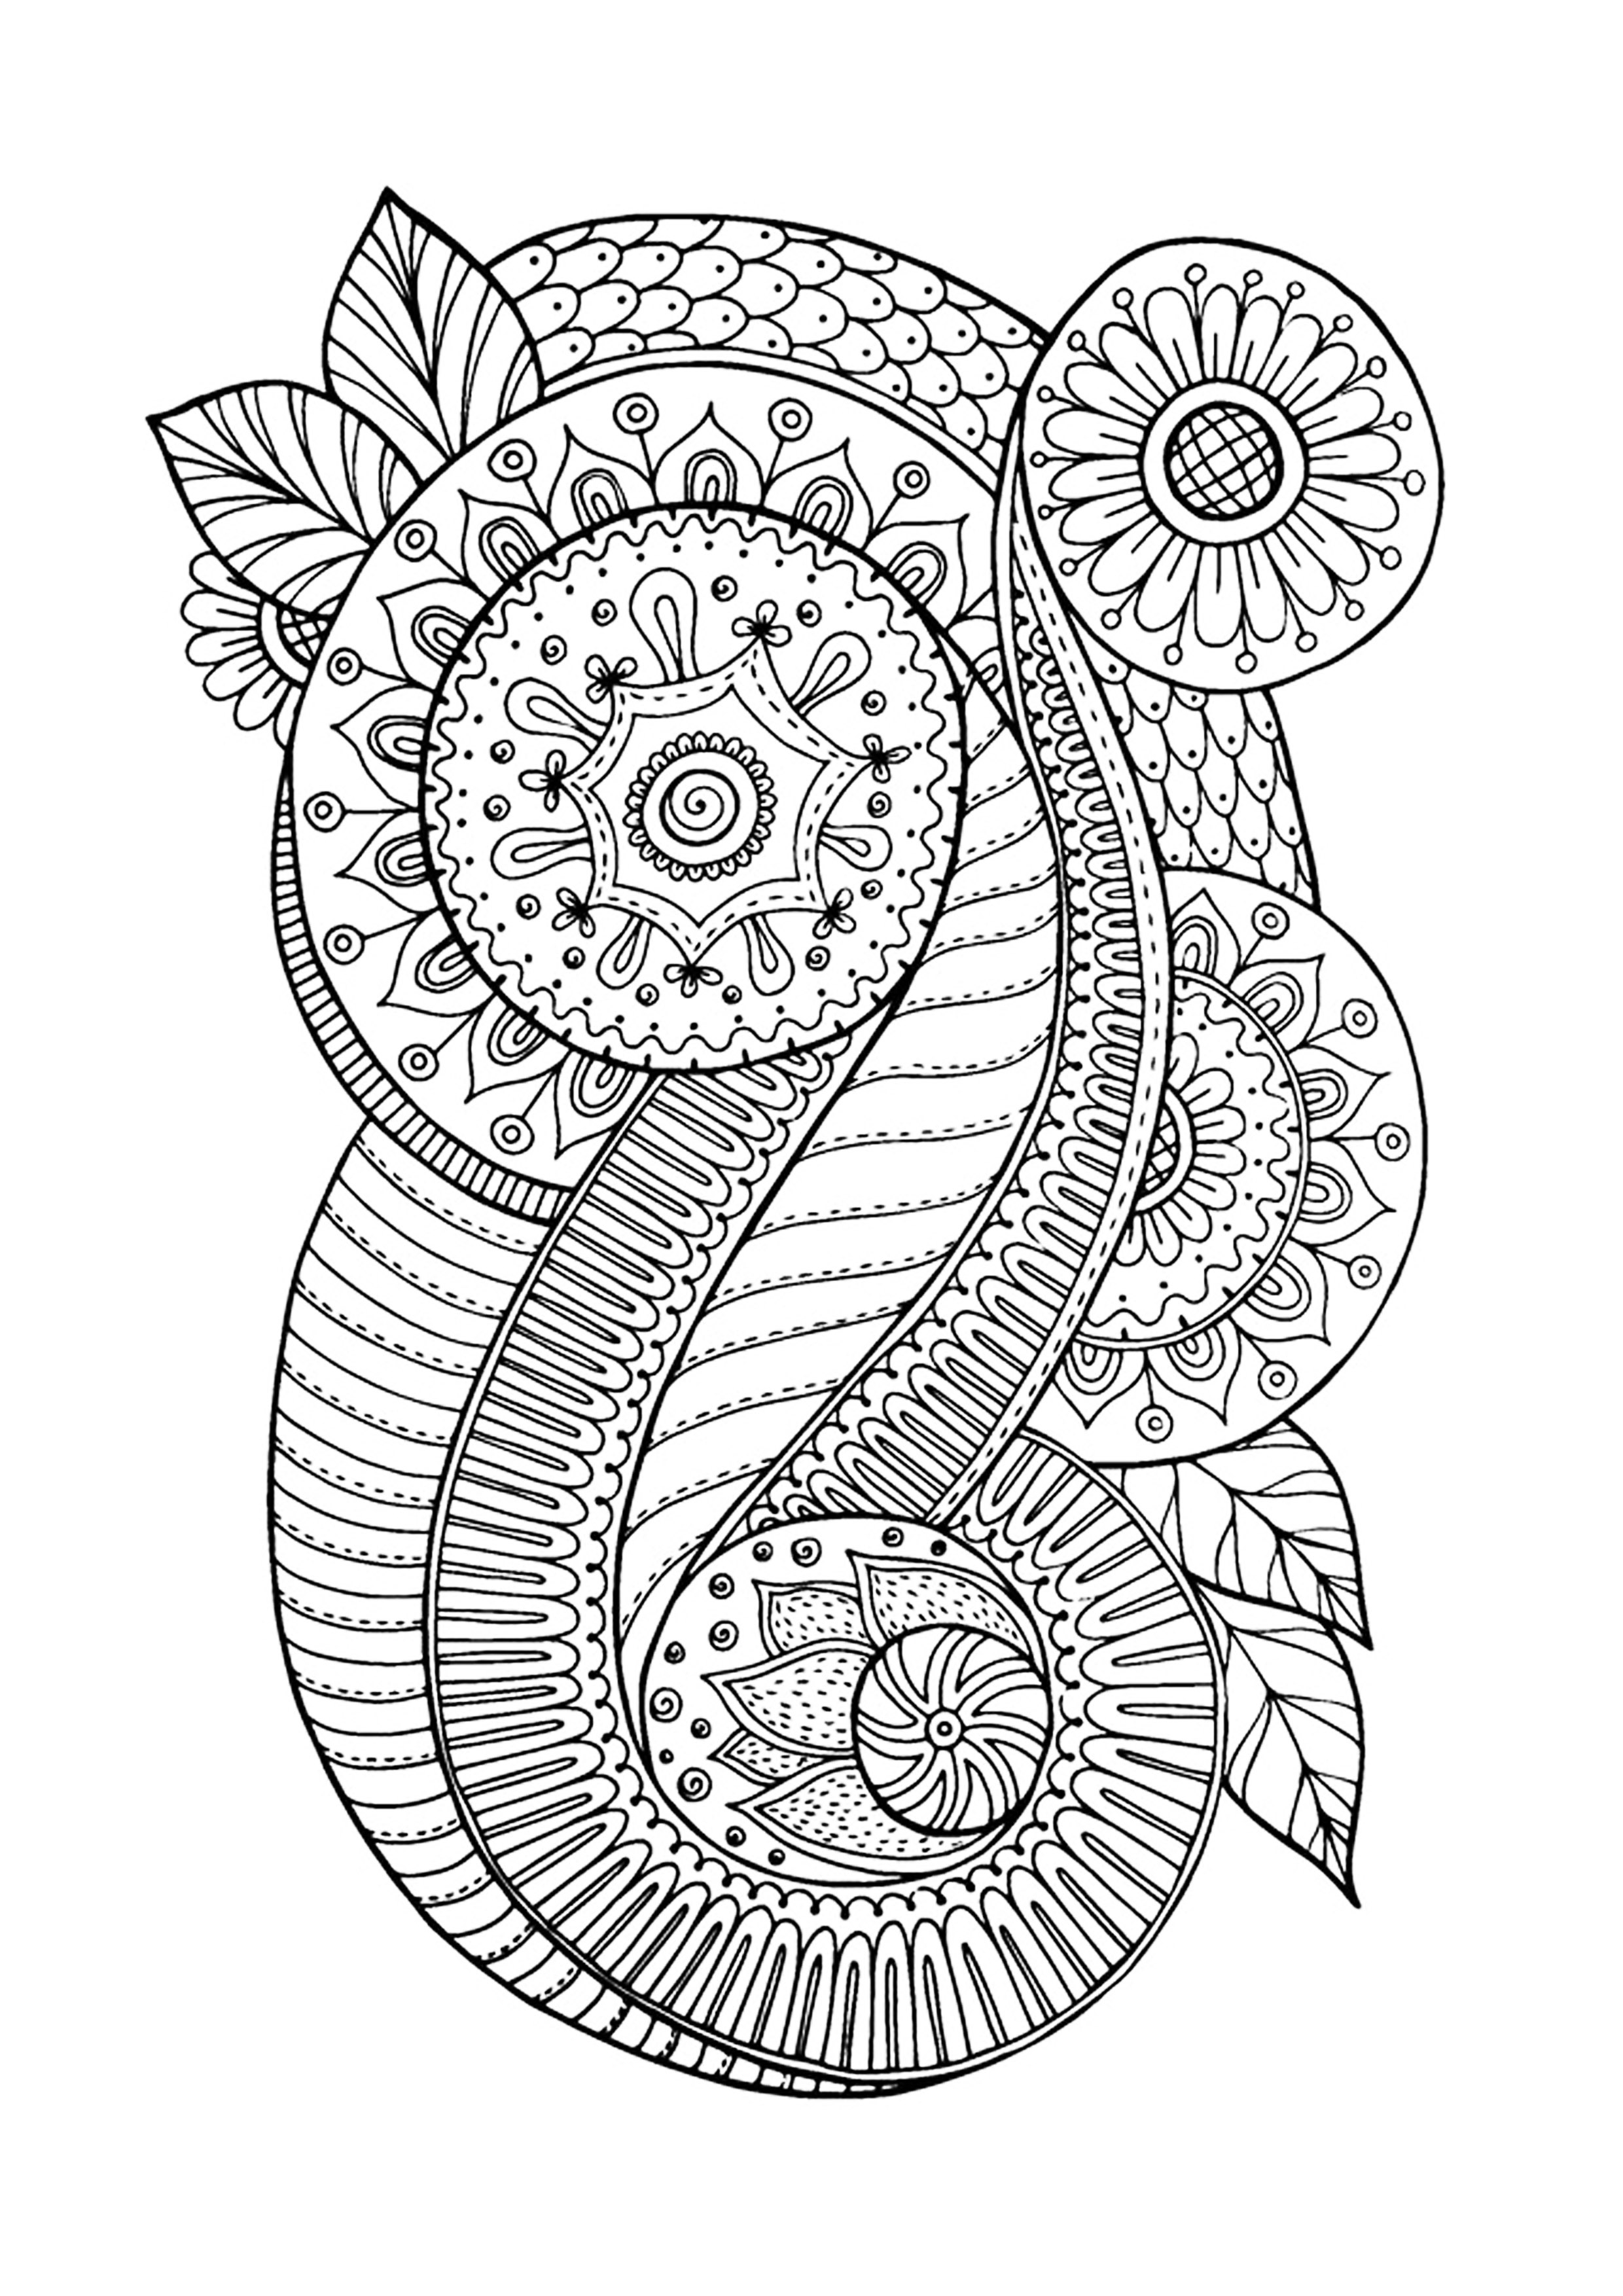 Zen antistress abstract pattern inspired - Anti stress Adult Coloring